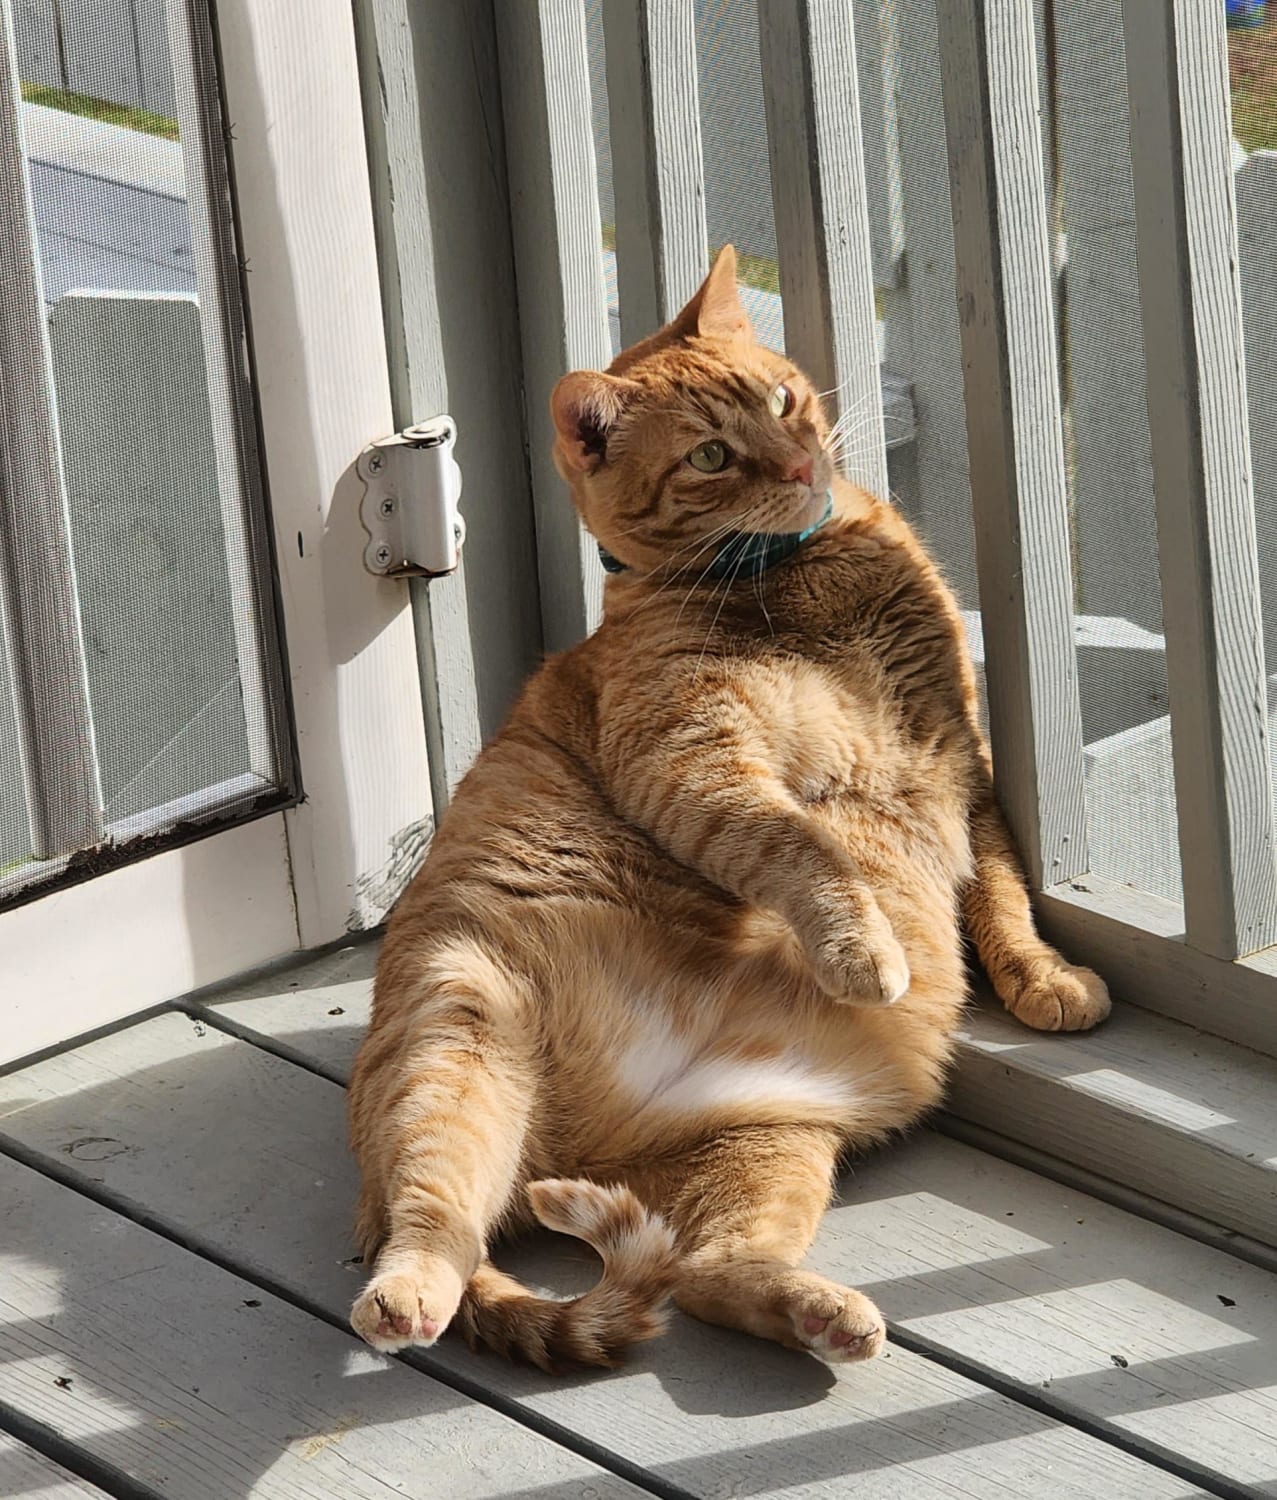 Marco sunbathing and showing off his figure.